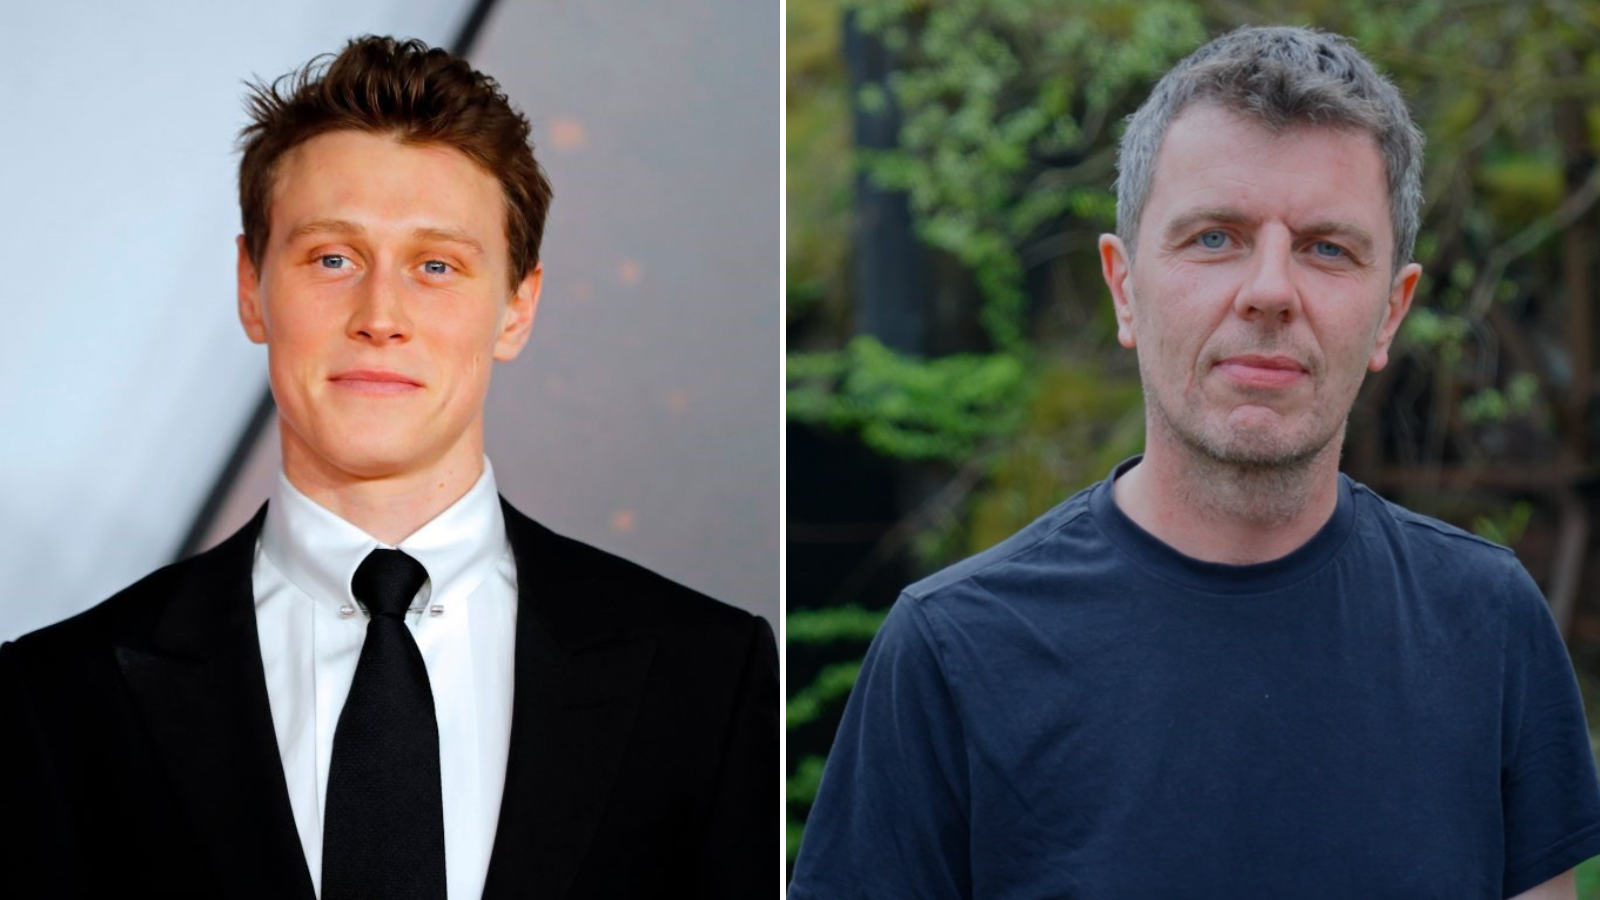 First image: Headshot of actor George MacKay, who wears a black suit and tie, and a white shirt. Photo by TOLGA AKMEN/AFP via Getty Images. Second image: headshot of director Paul Wright who wears a blue t-shirt. Photo by Nick Cooke.